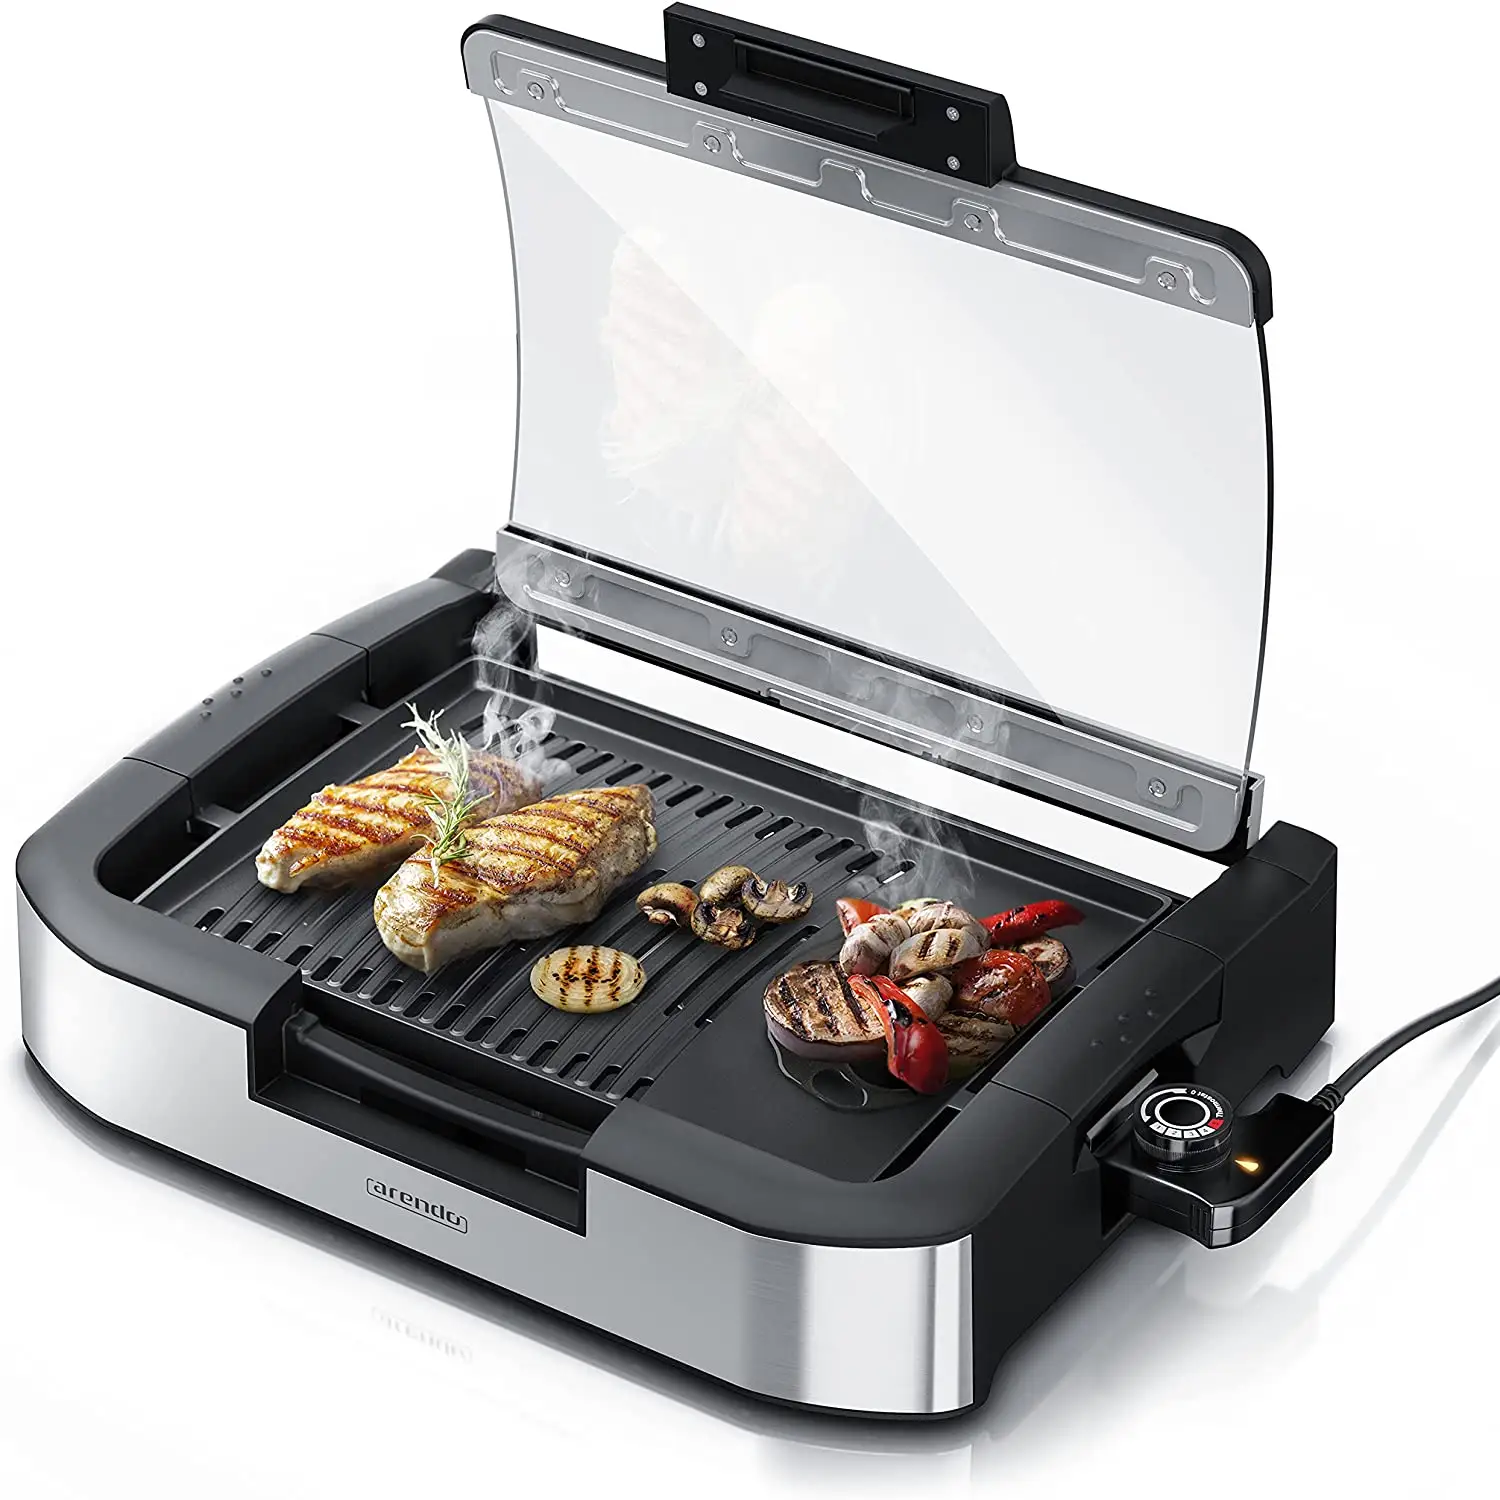 Aibo 2023 2200W ououseholg ARGE tiultifunctional leclectric Bbq Rill con Lass ID id